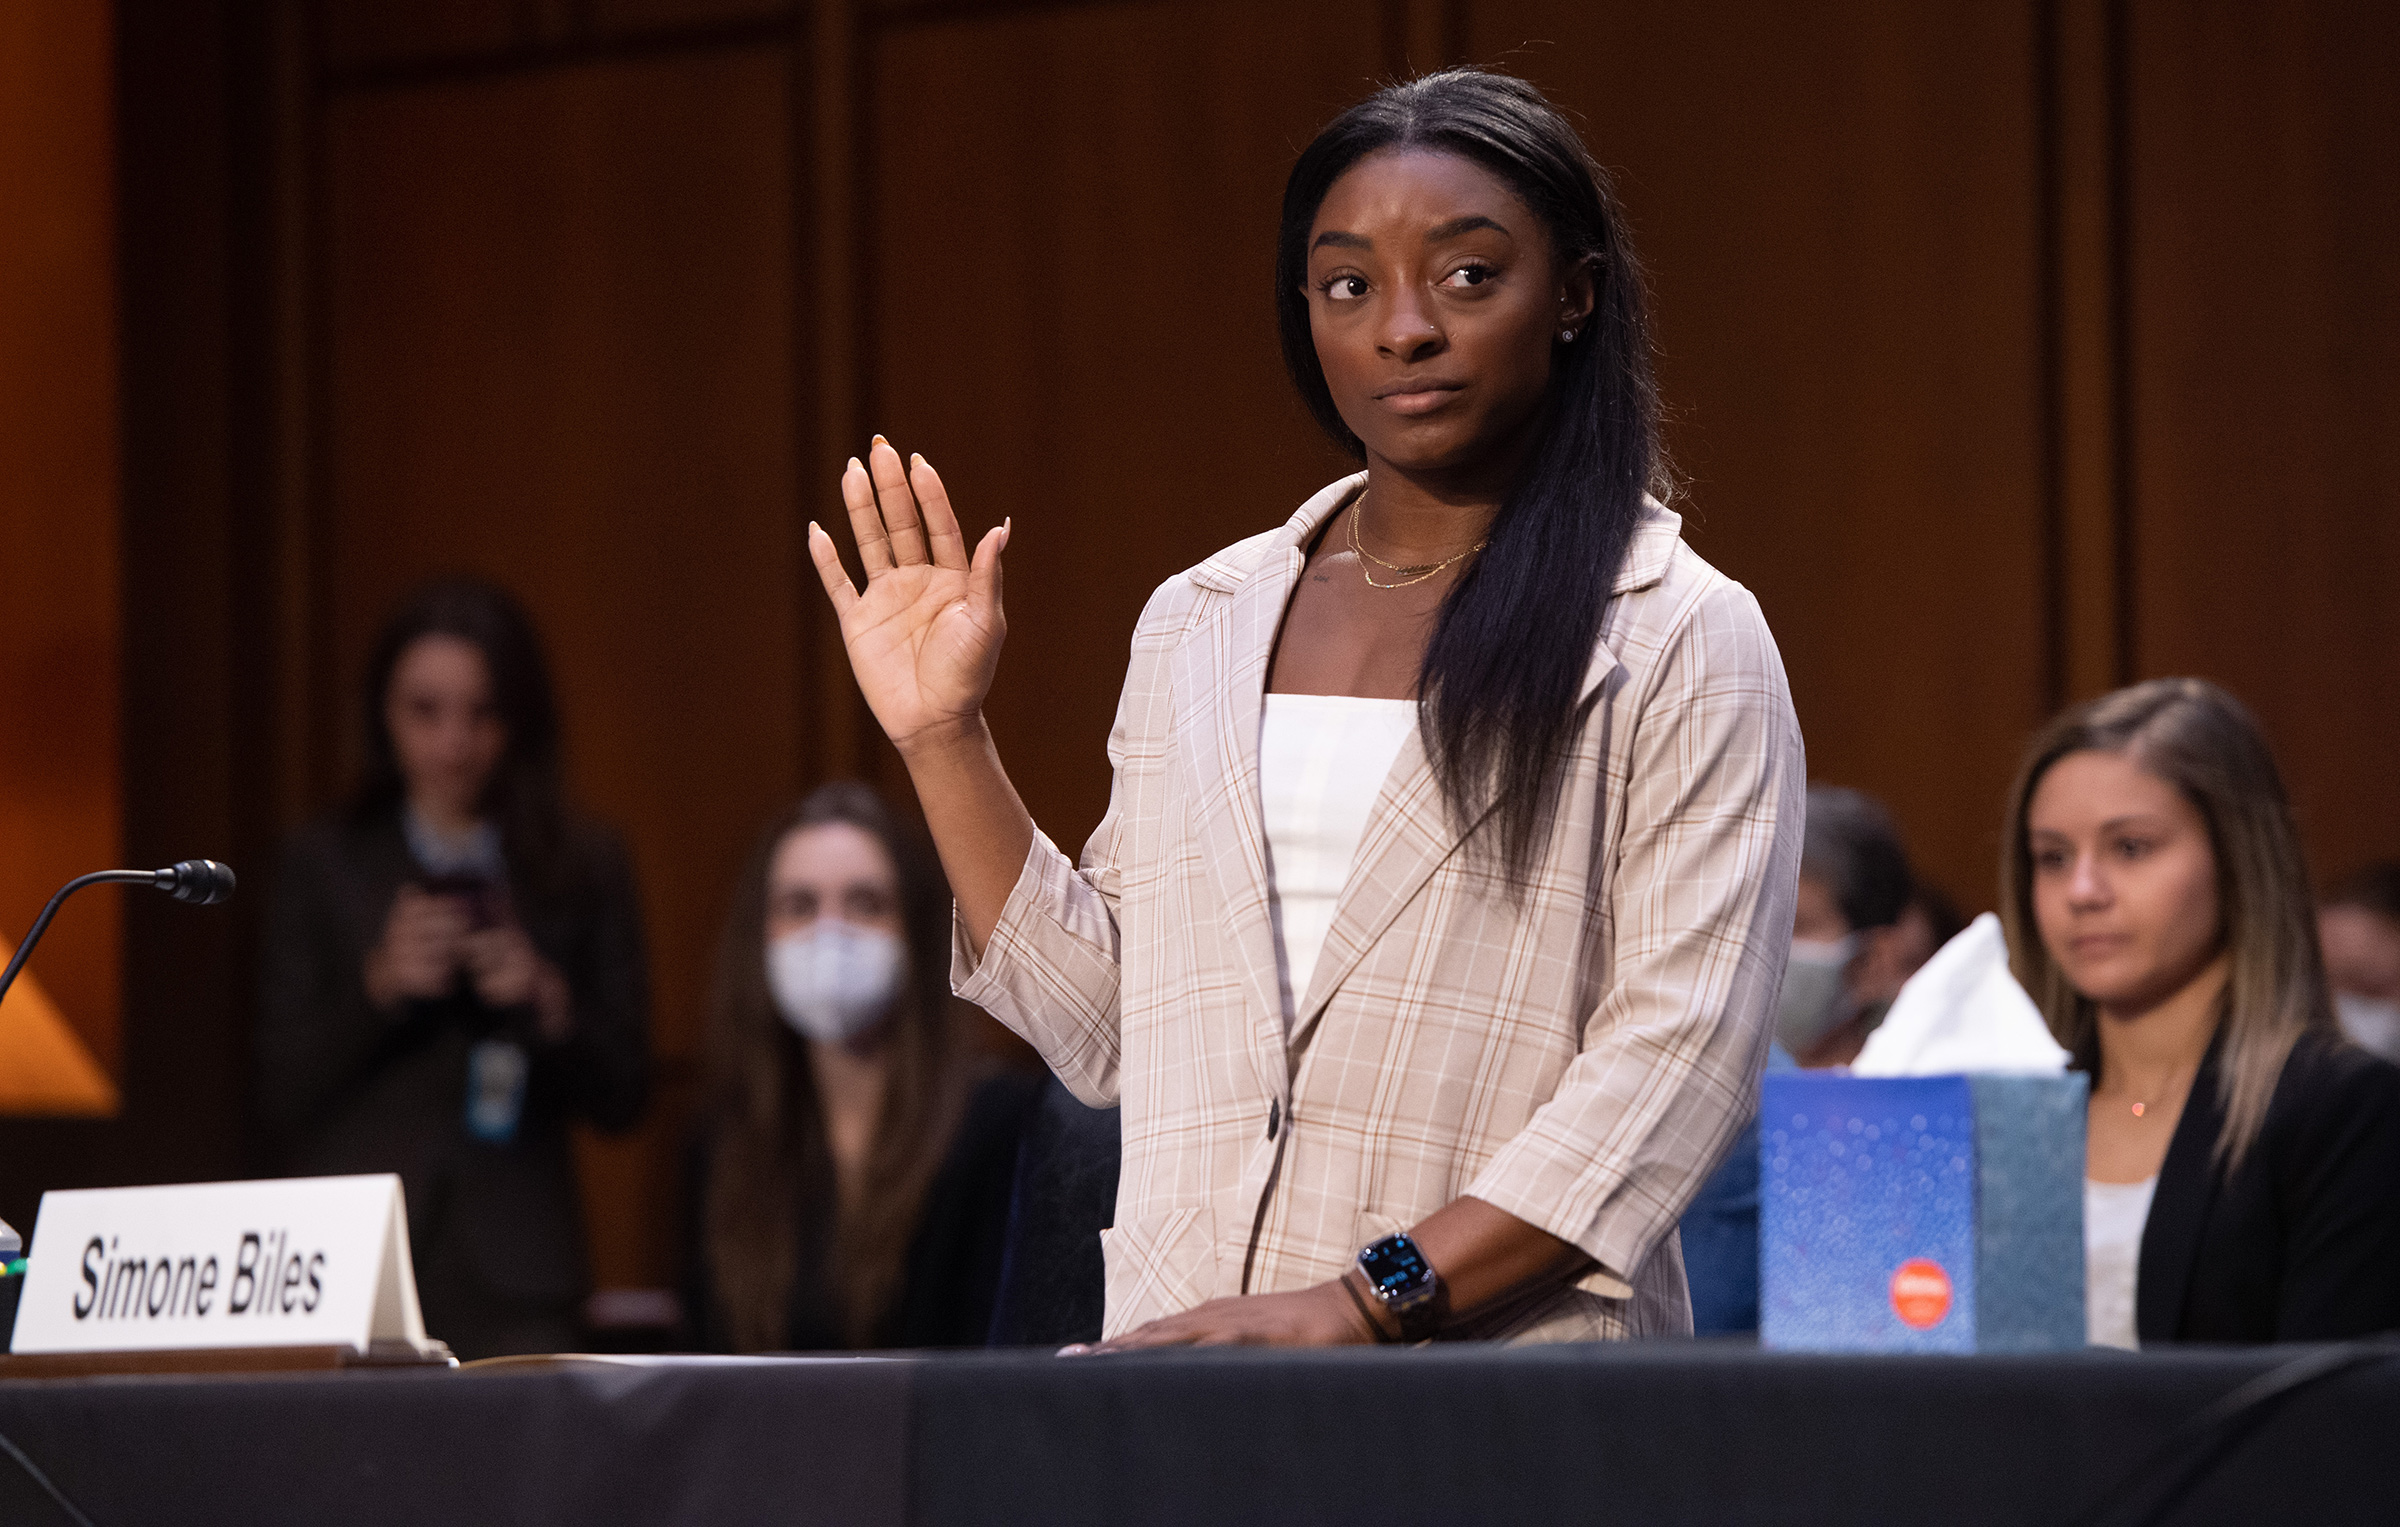 Biles at a Senate hearing on the FBI’s handling of the Larry Nassar investigation on Sept. 15 (Saul Loeb—Pool/Getty Images)